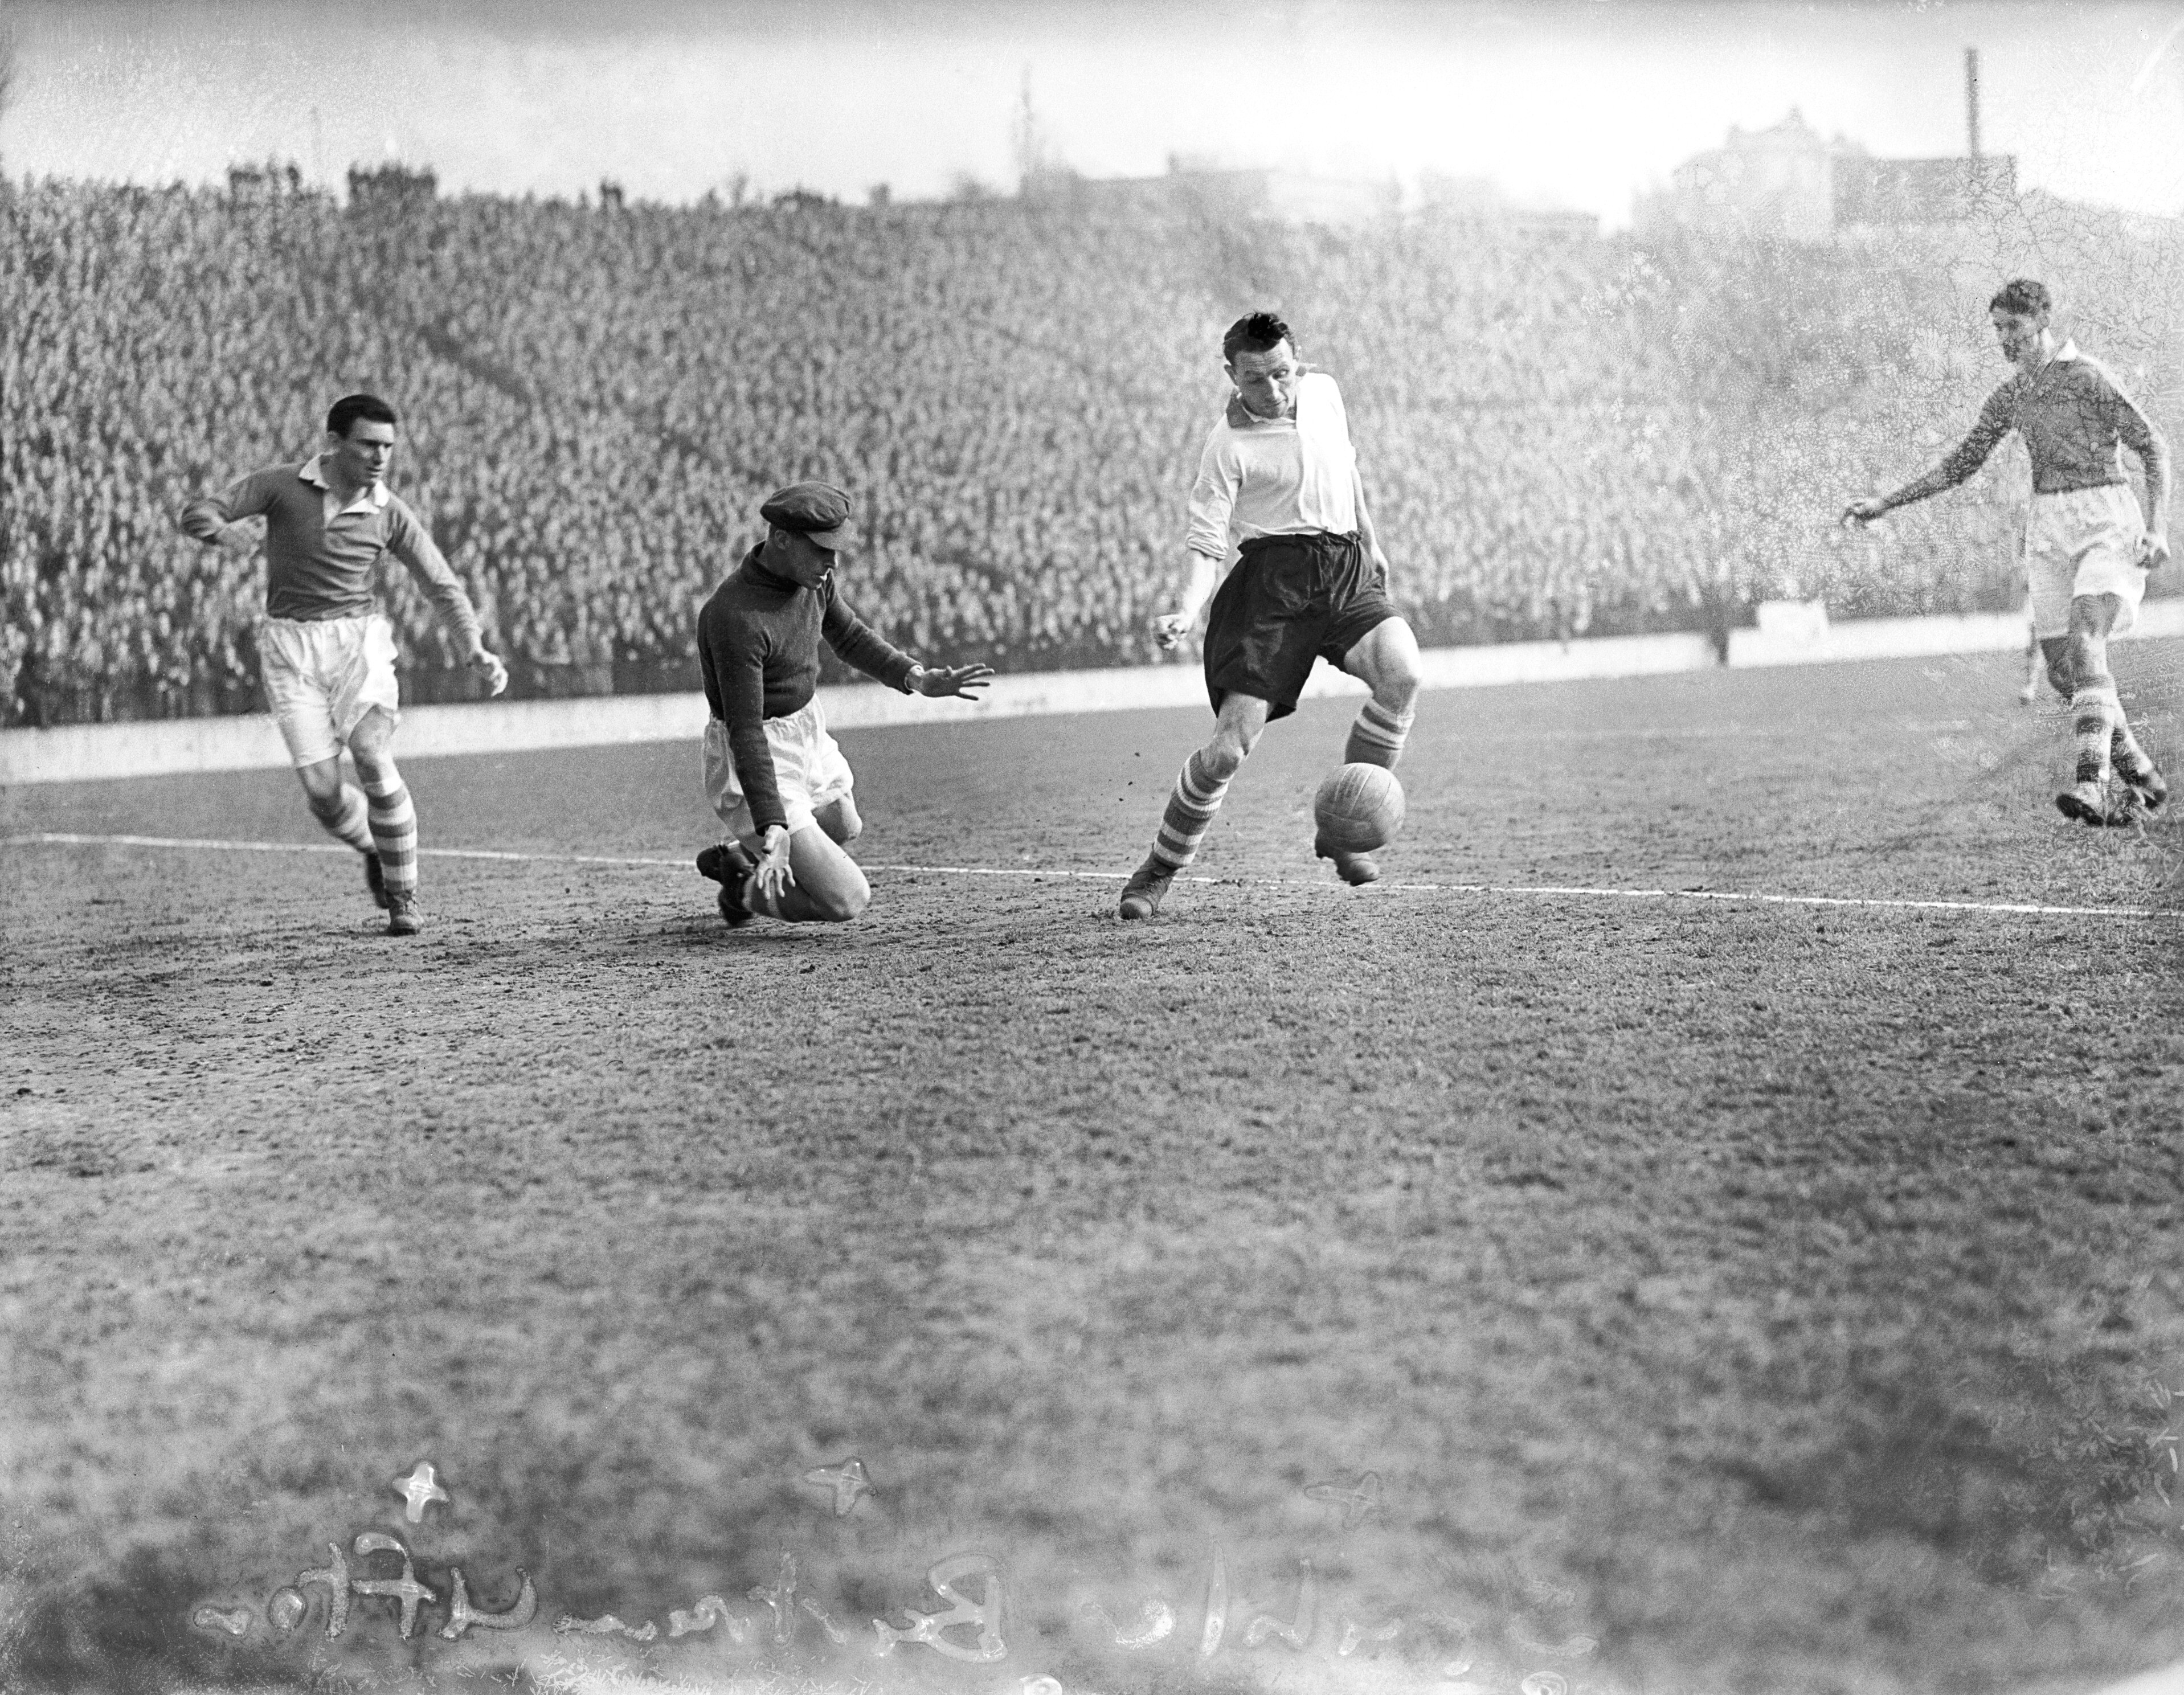 Charlton earned a club-record 8-1 victory over Middlesbrough on September 12th, 1953